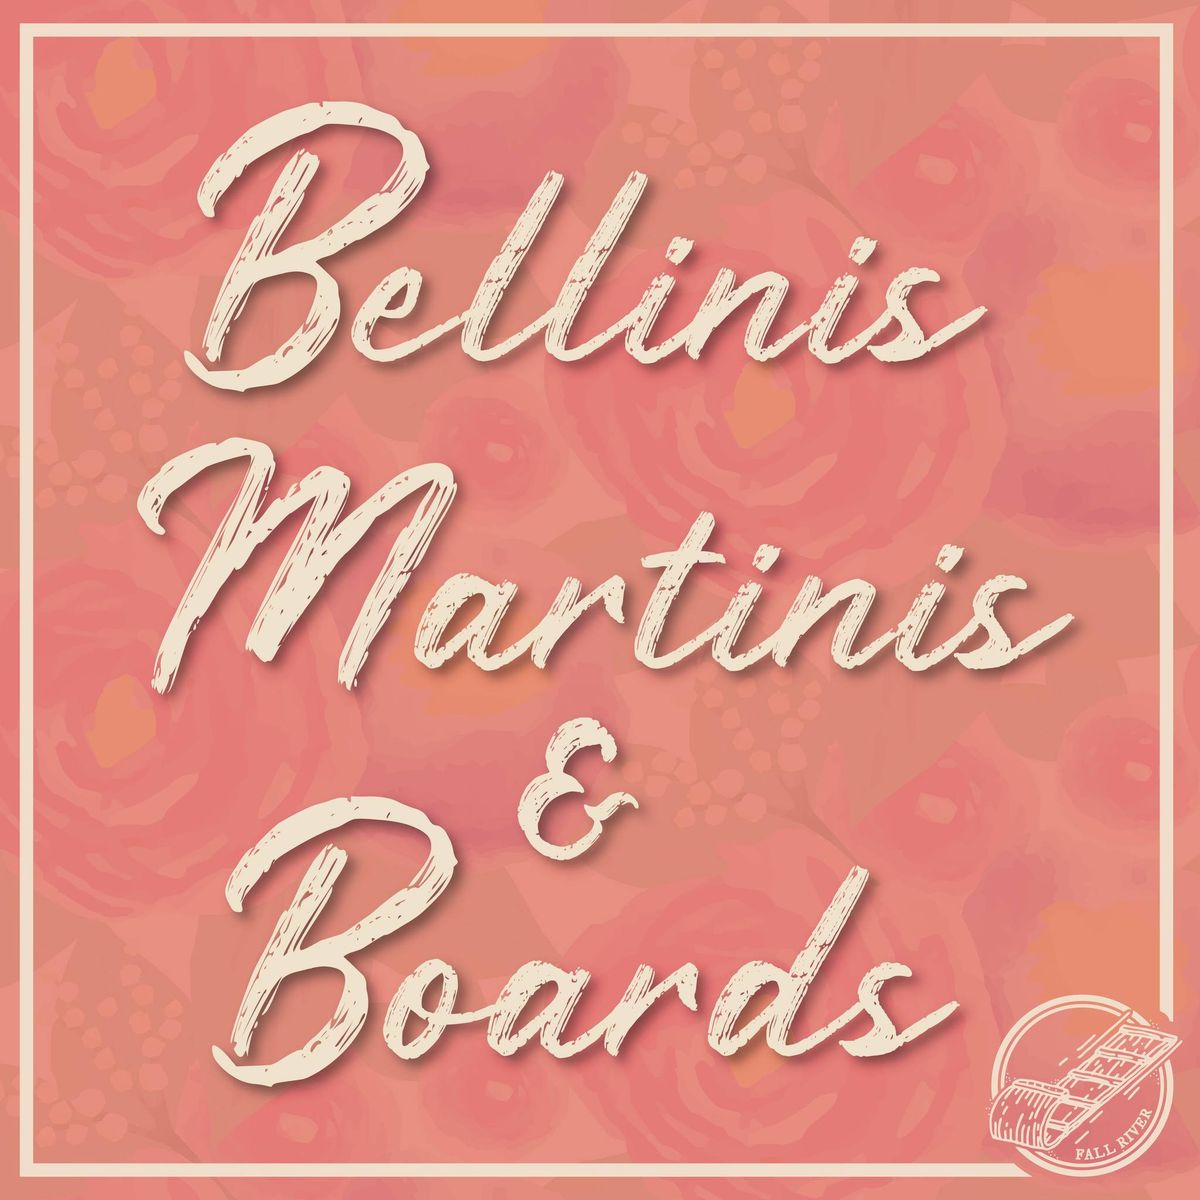 Bellinis, Martinis and Boards